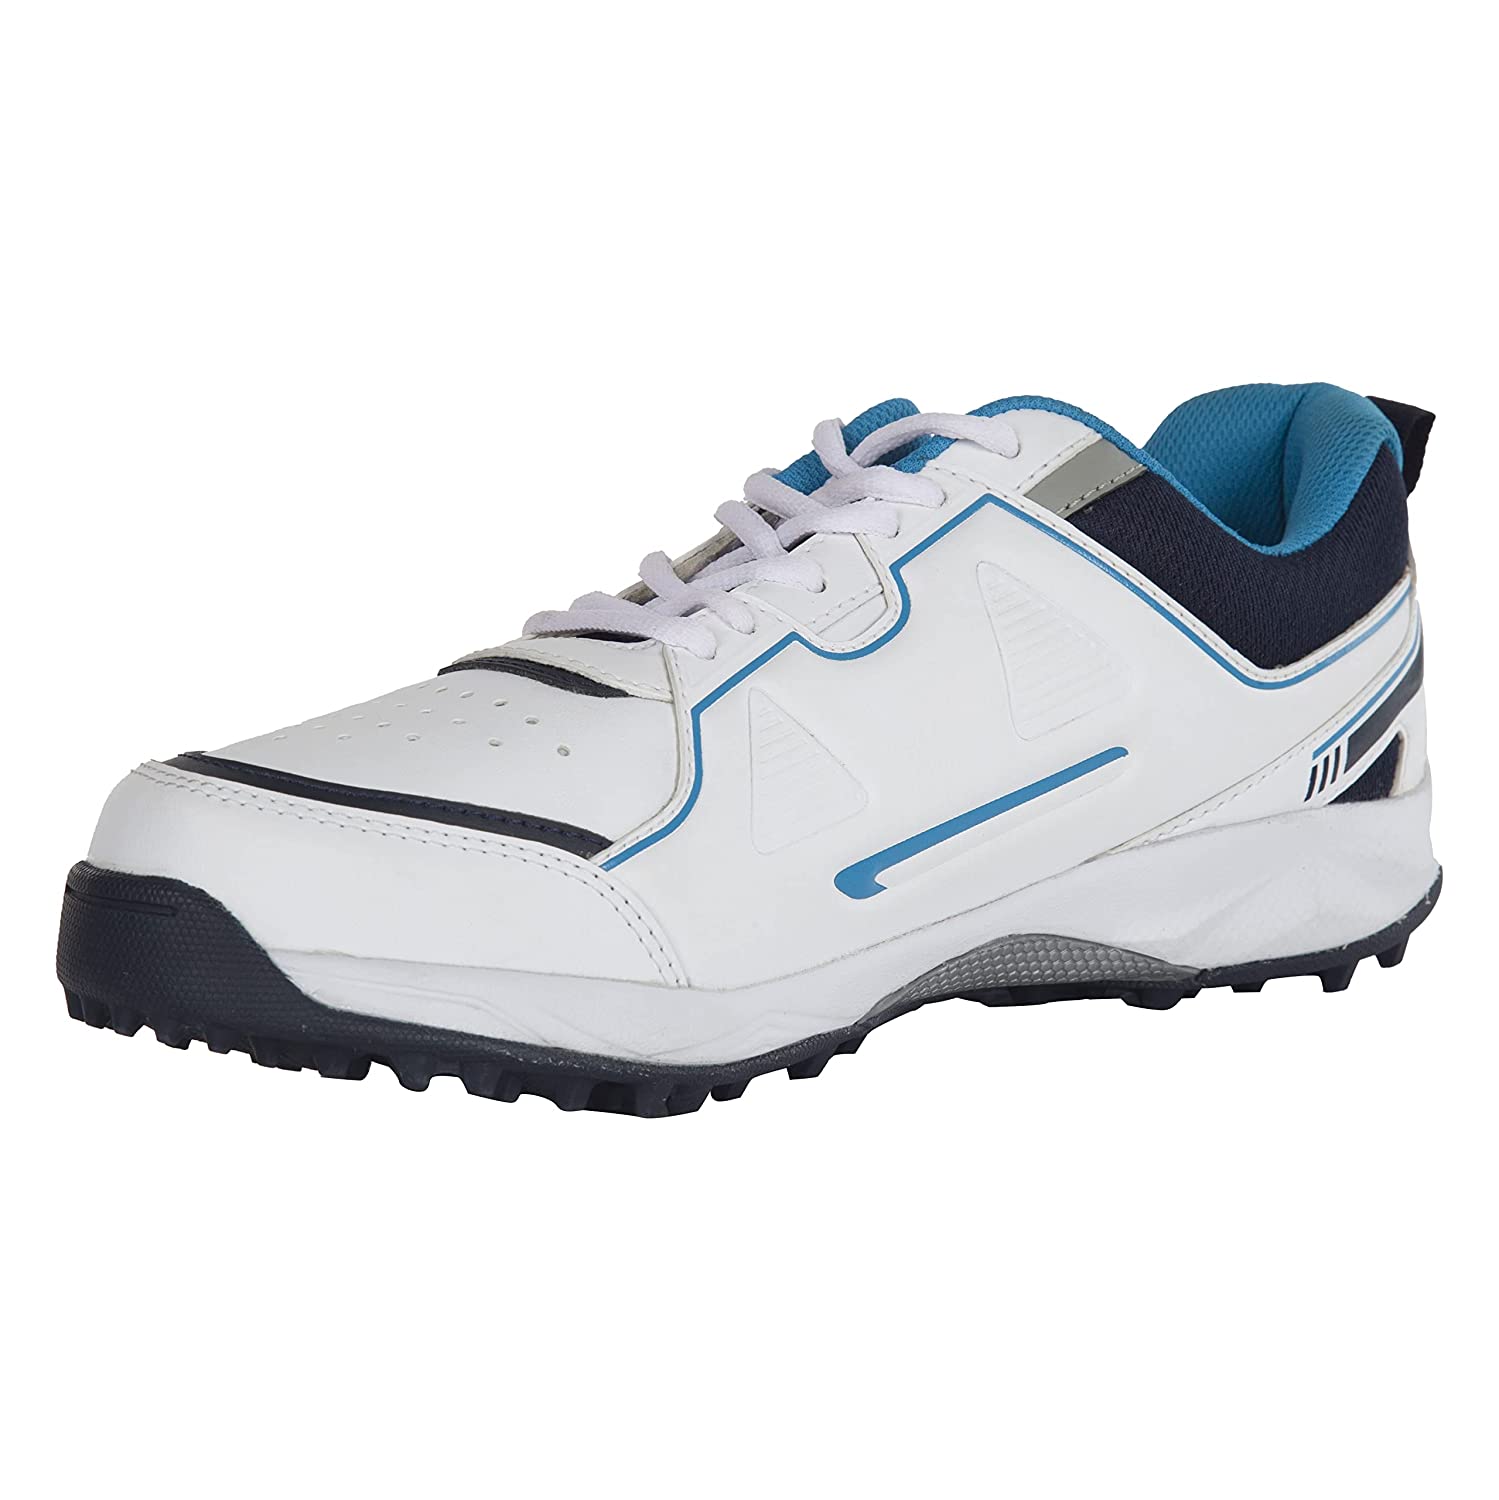 Buy Flx Jr Cricket Shoes Jr Blue CS 300 (UK 5 - EU 38) Online at Low Prices  in India - Amazon.in